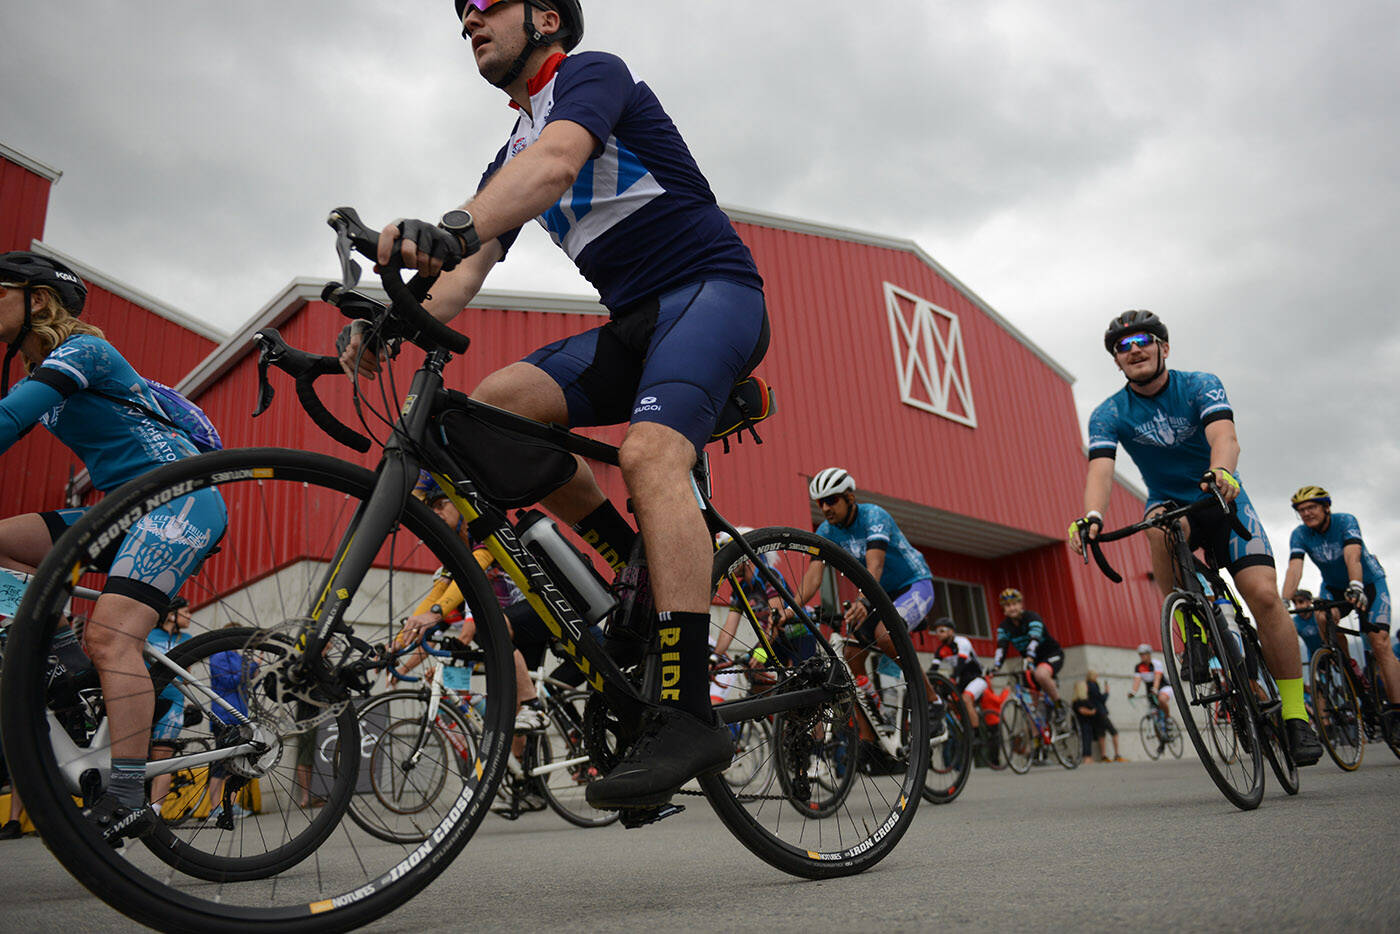 More than 1,100 cyclists leave Chilliwack Heritage Park for the annual Tour de Cure fundraiser for BC Cancer Foundation on Saturday, Aug. 27, 2022. (Jenna Hauck/ Chilliwack Progress)